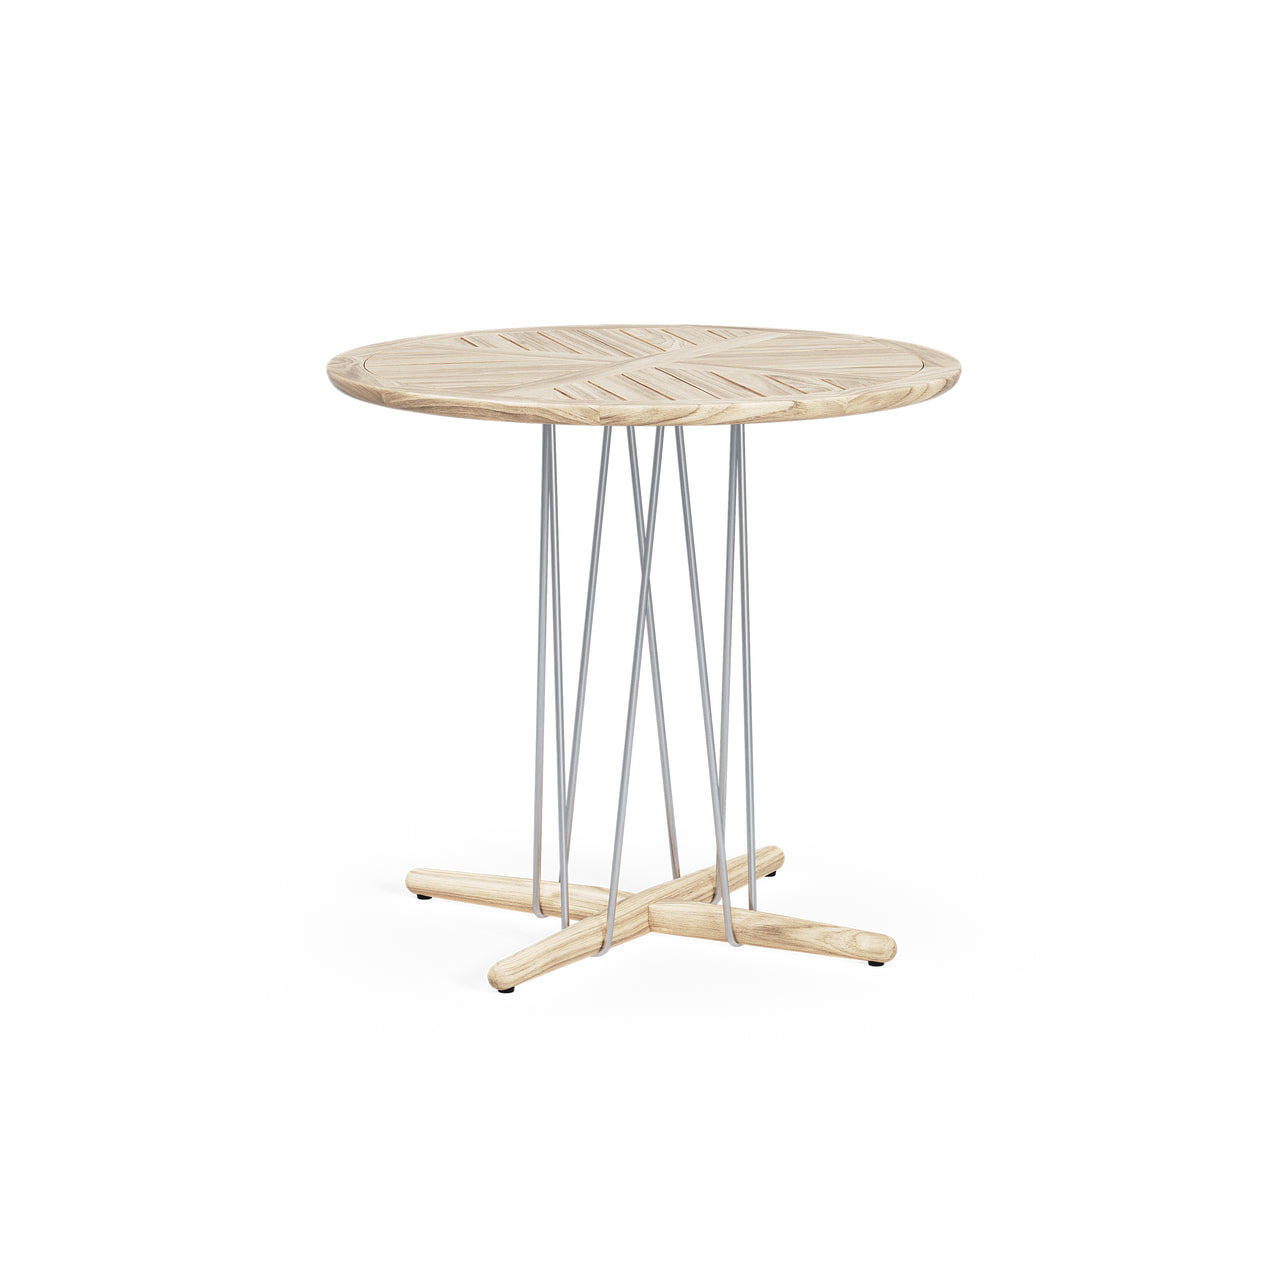 E022 Embrace Outdoor Dining Table: Small - 31.5